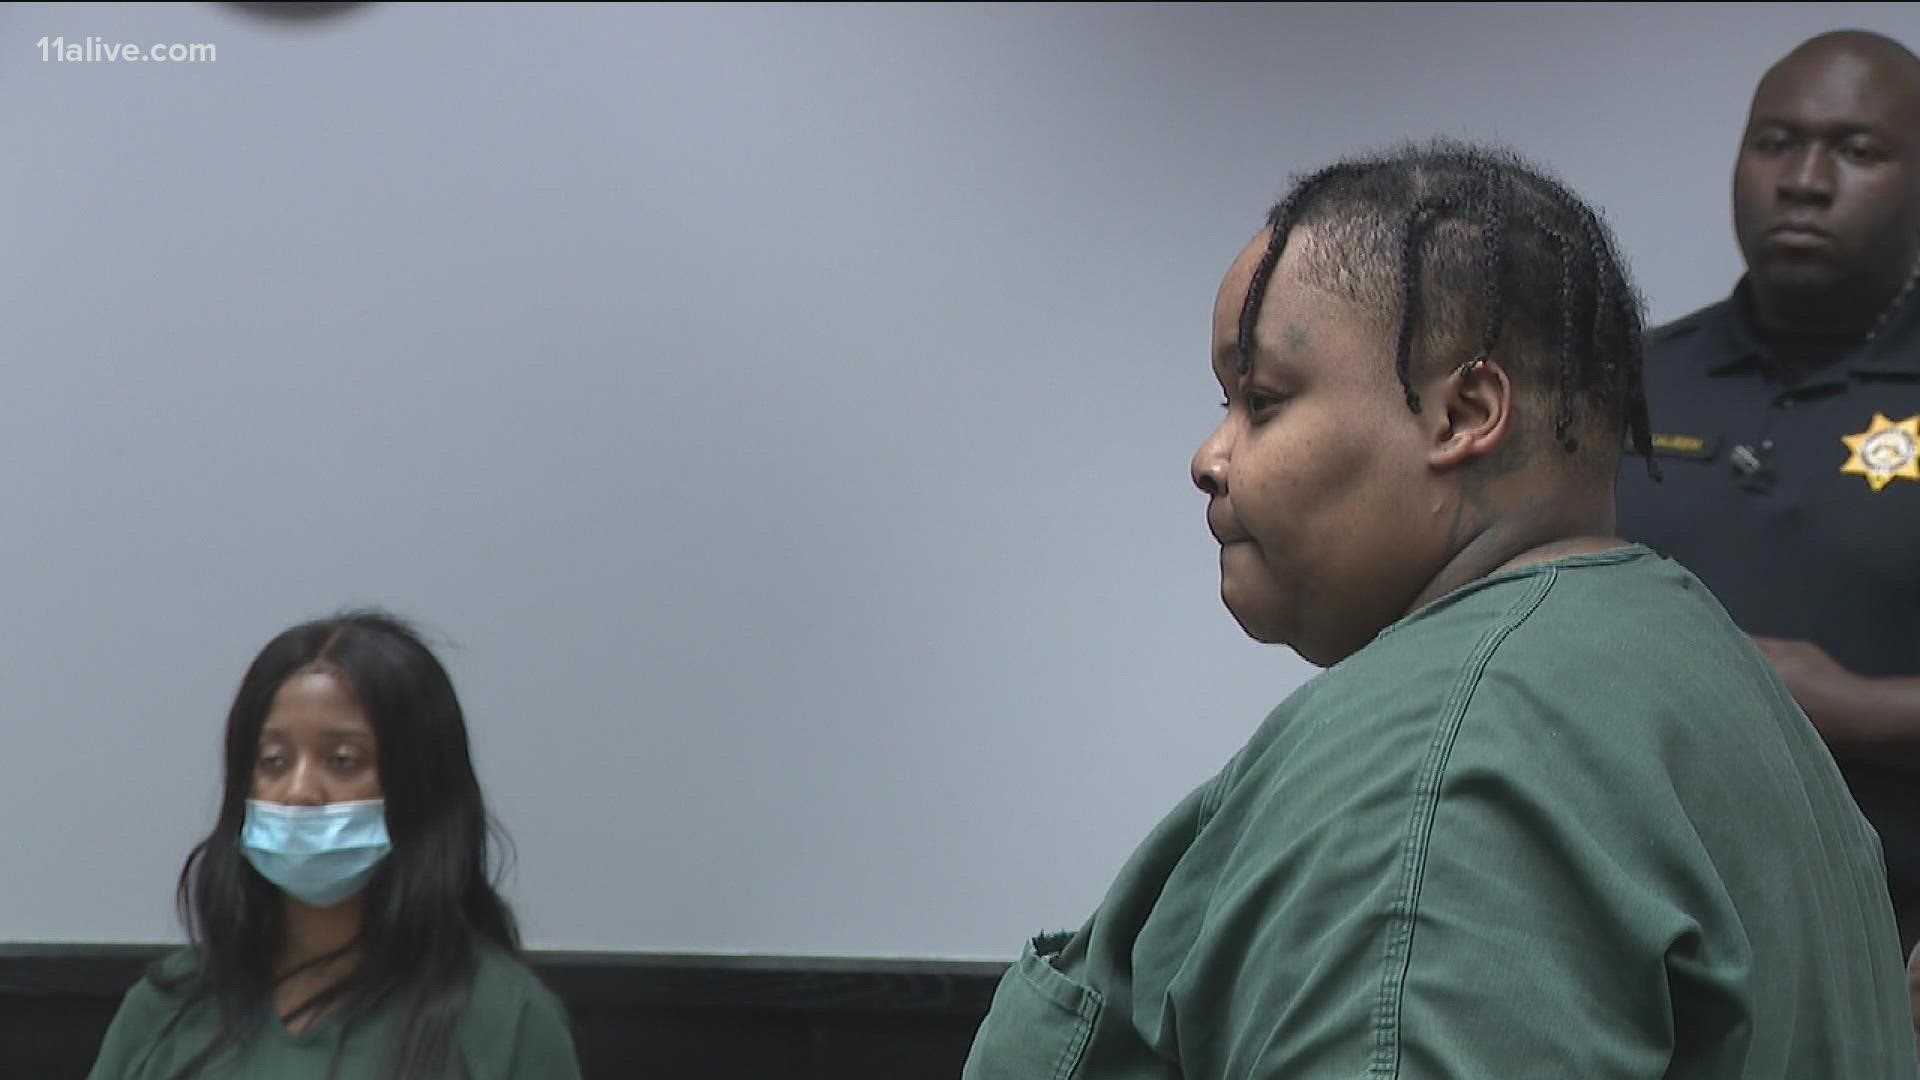 The case against two women charged in connection with the death of an 8-year-old Gwinnett County girl with autism moves forward.